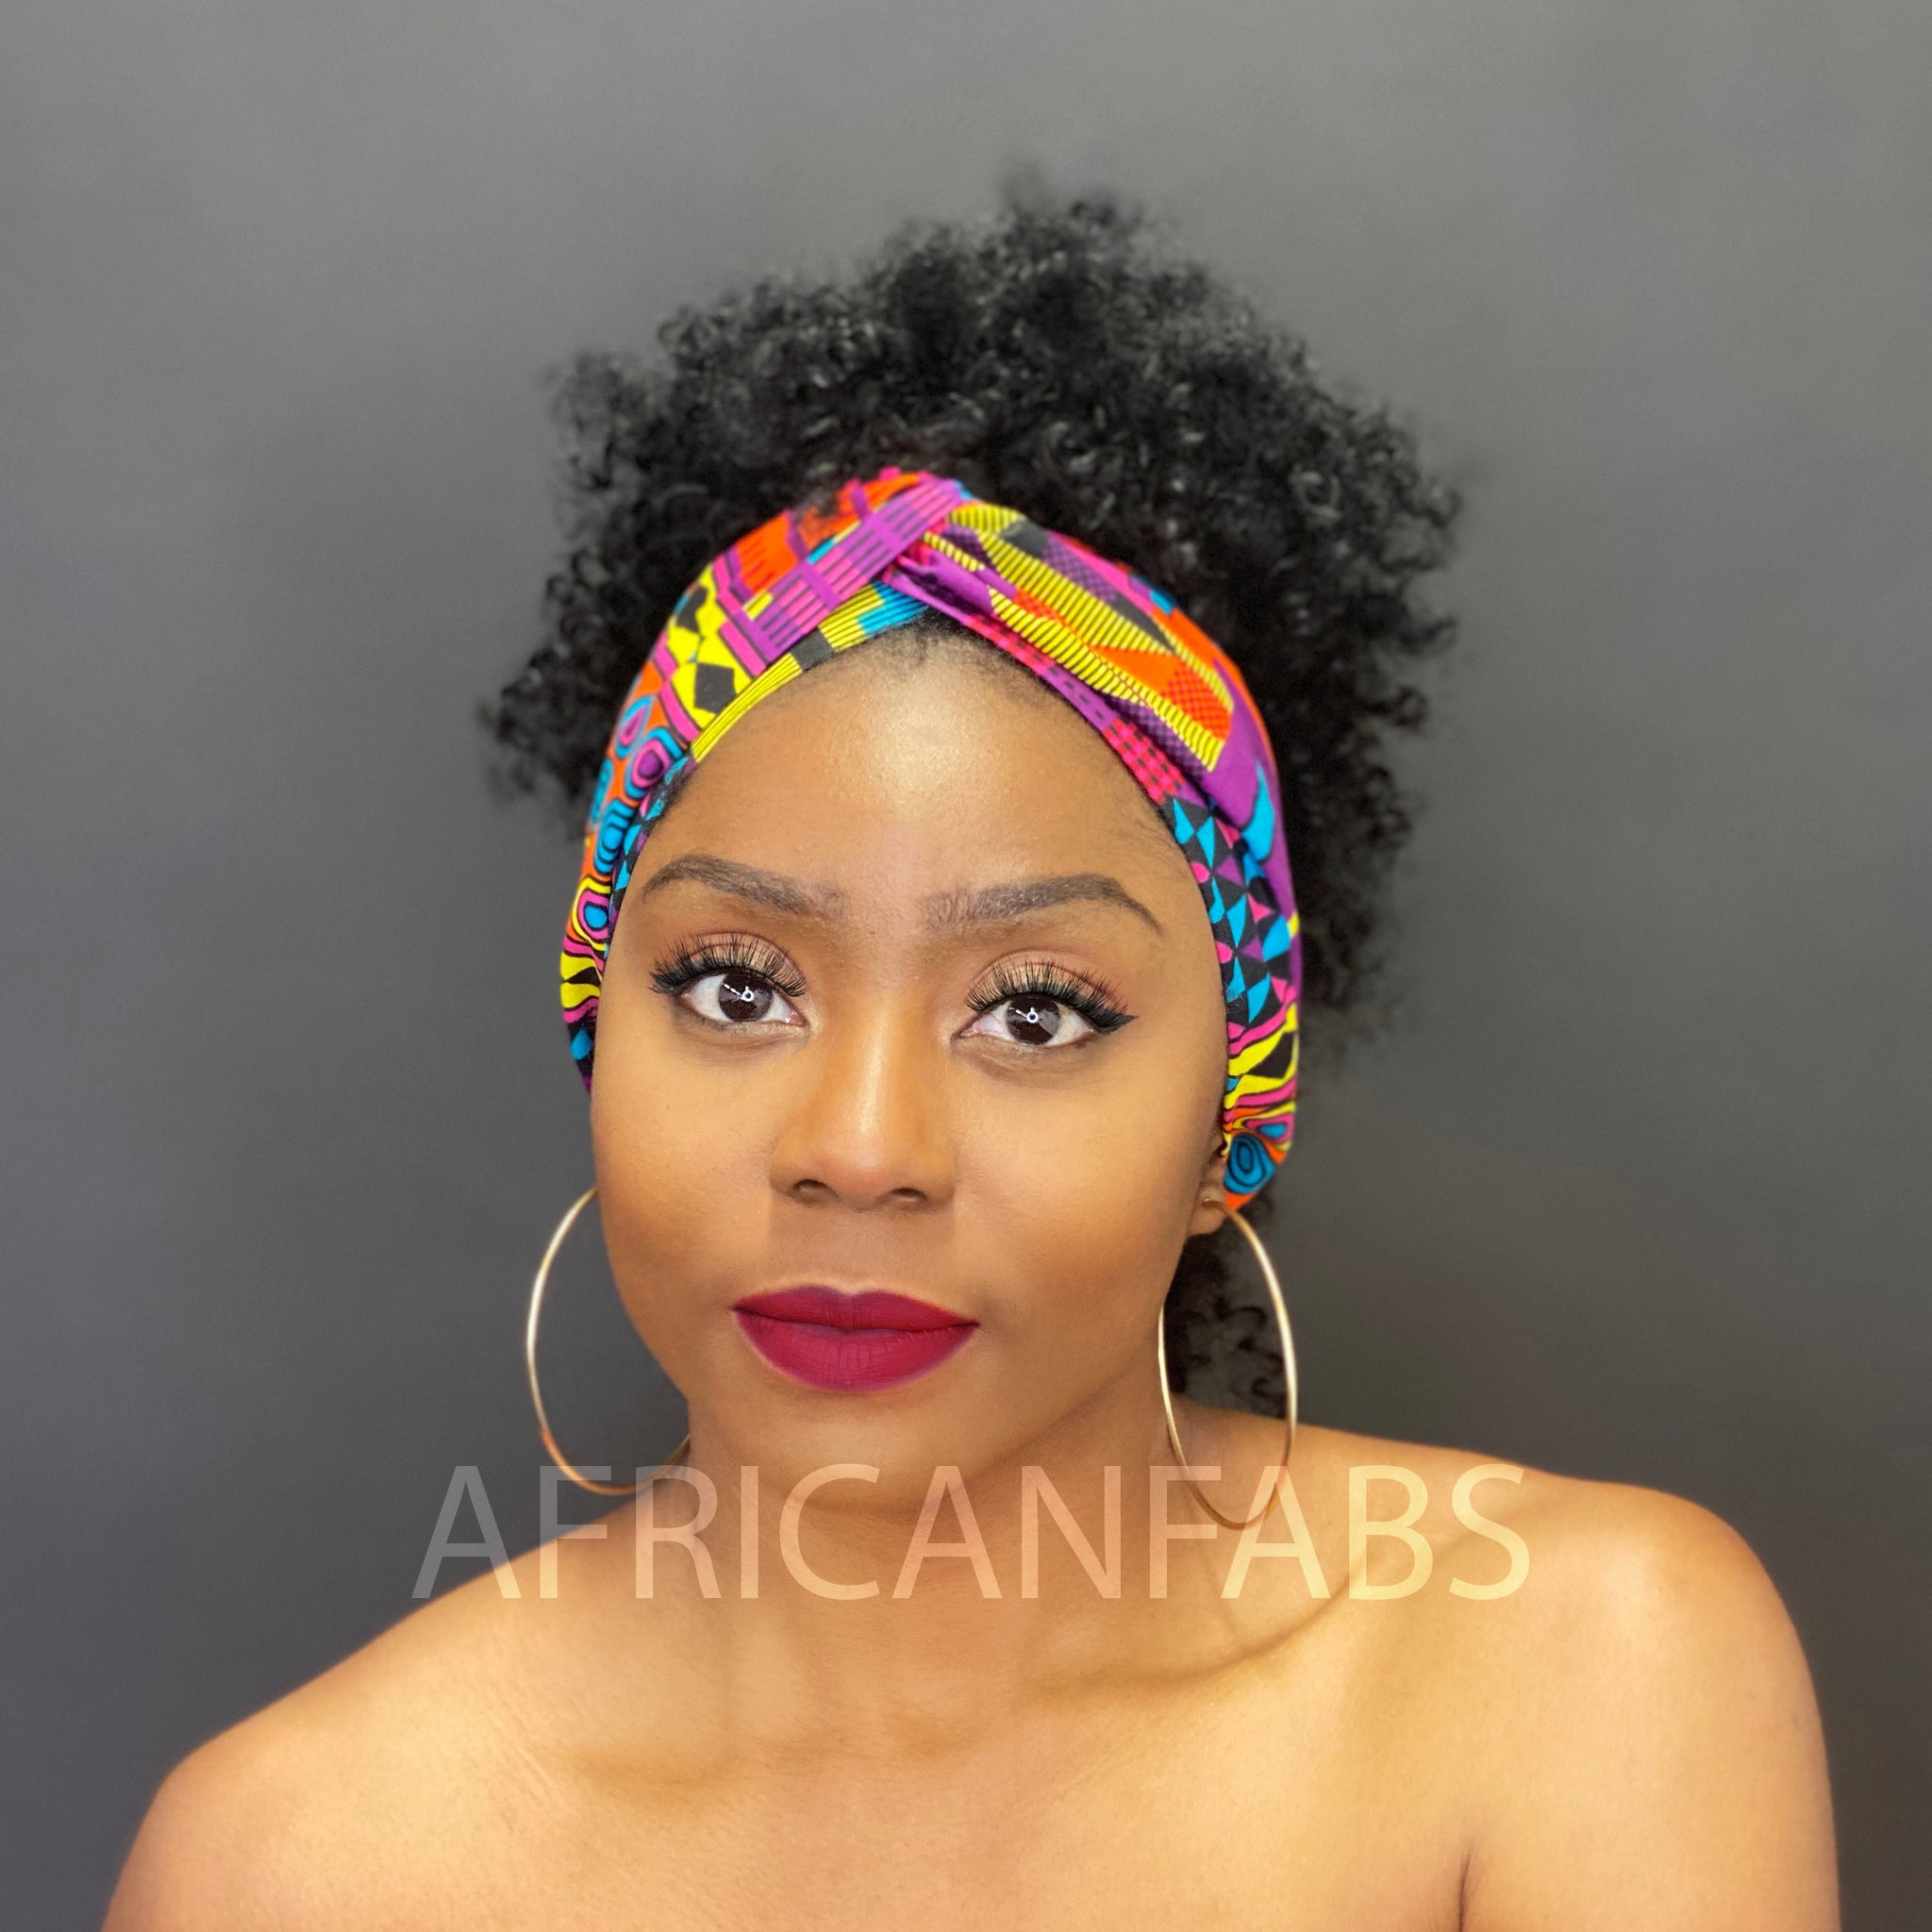 African print Headband - Adults - Hair Accessories - Multi color kente –  AfricanFabs